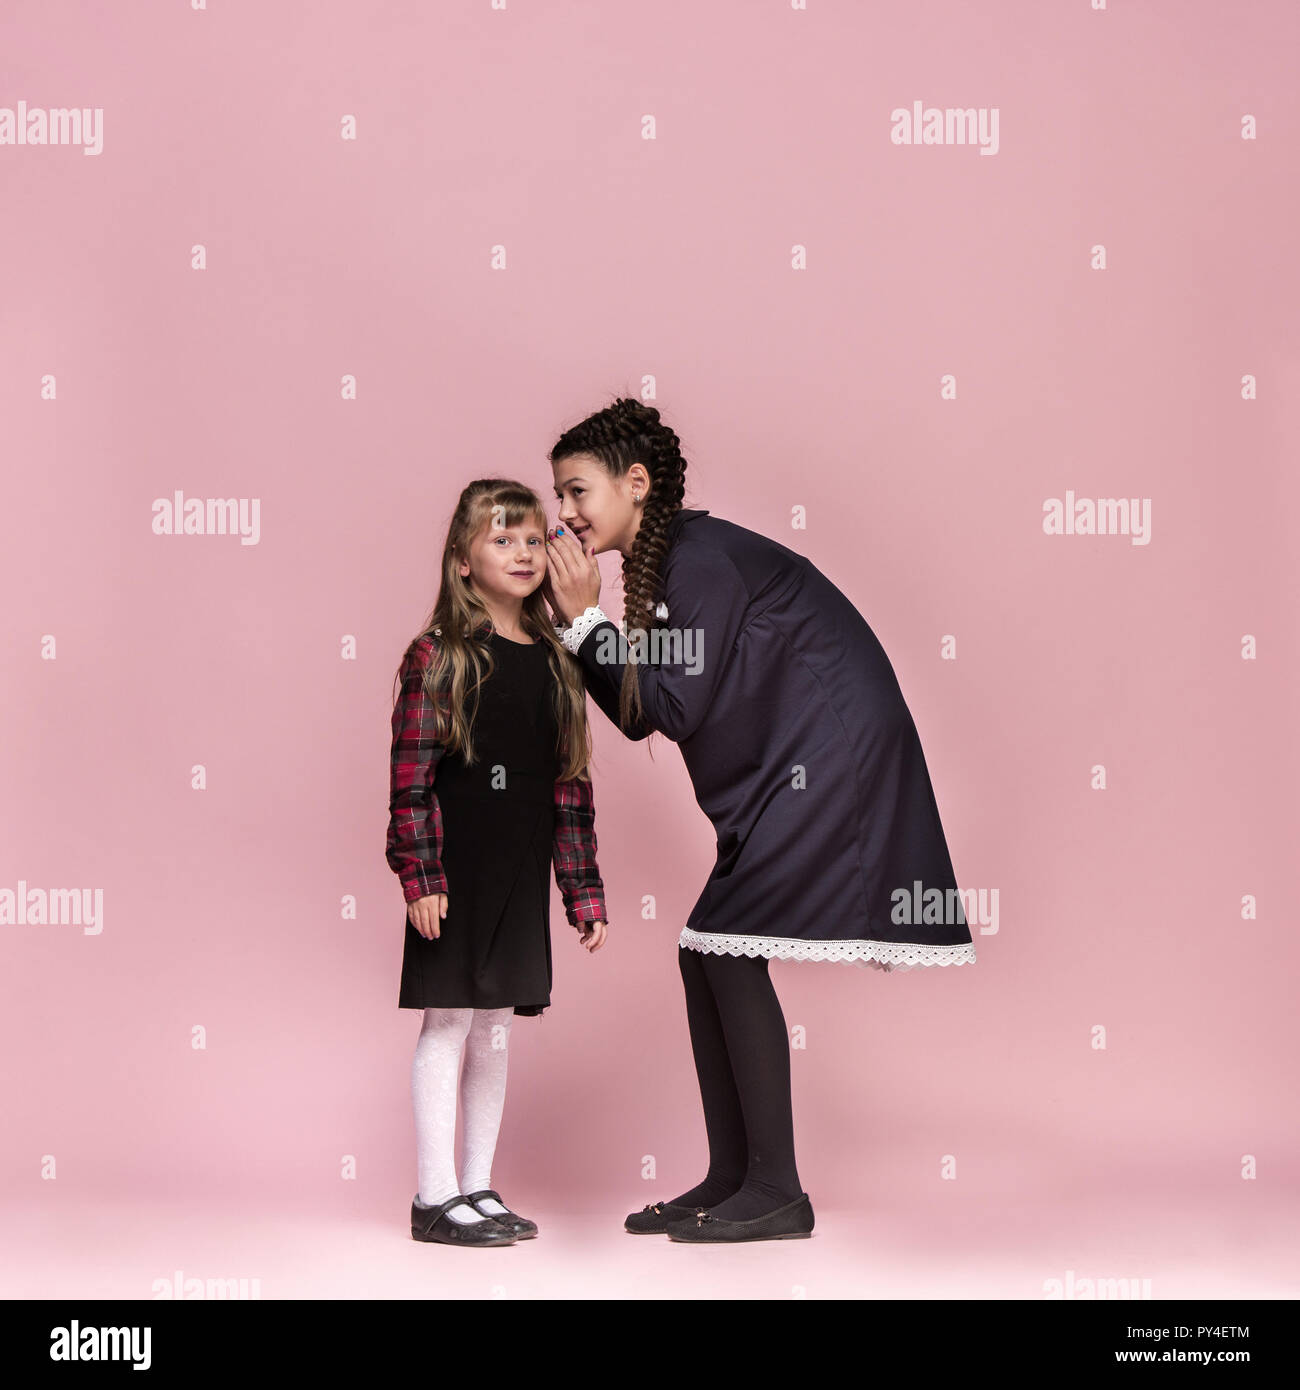 Cute smiling happy stylish children on pink background. Beautiful stylish teen girls standing together and posing at studio. Classic style. Kids fashion and emotions concept. Stock Photo